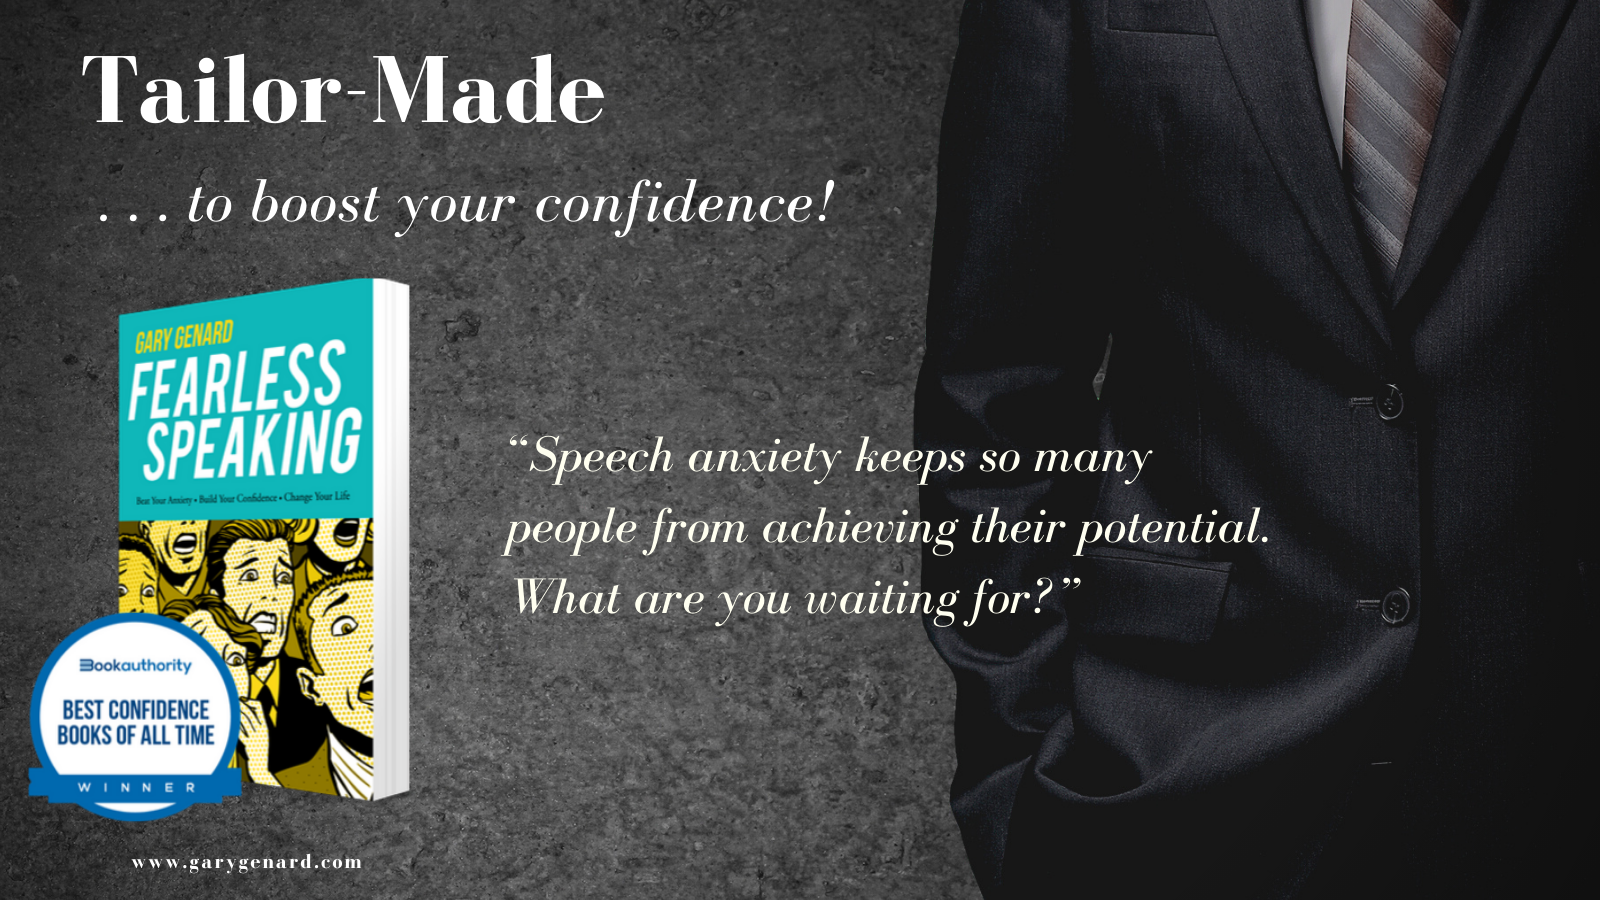 One of the 100 Best Confidence Books of All Time, Dr. Gary Genard's Fearless Speaking.